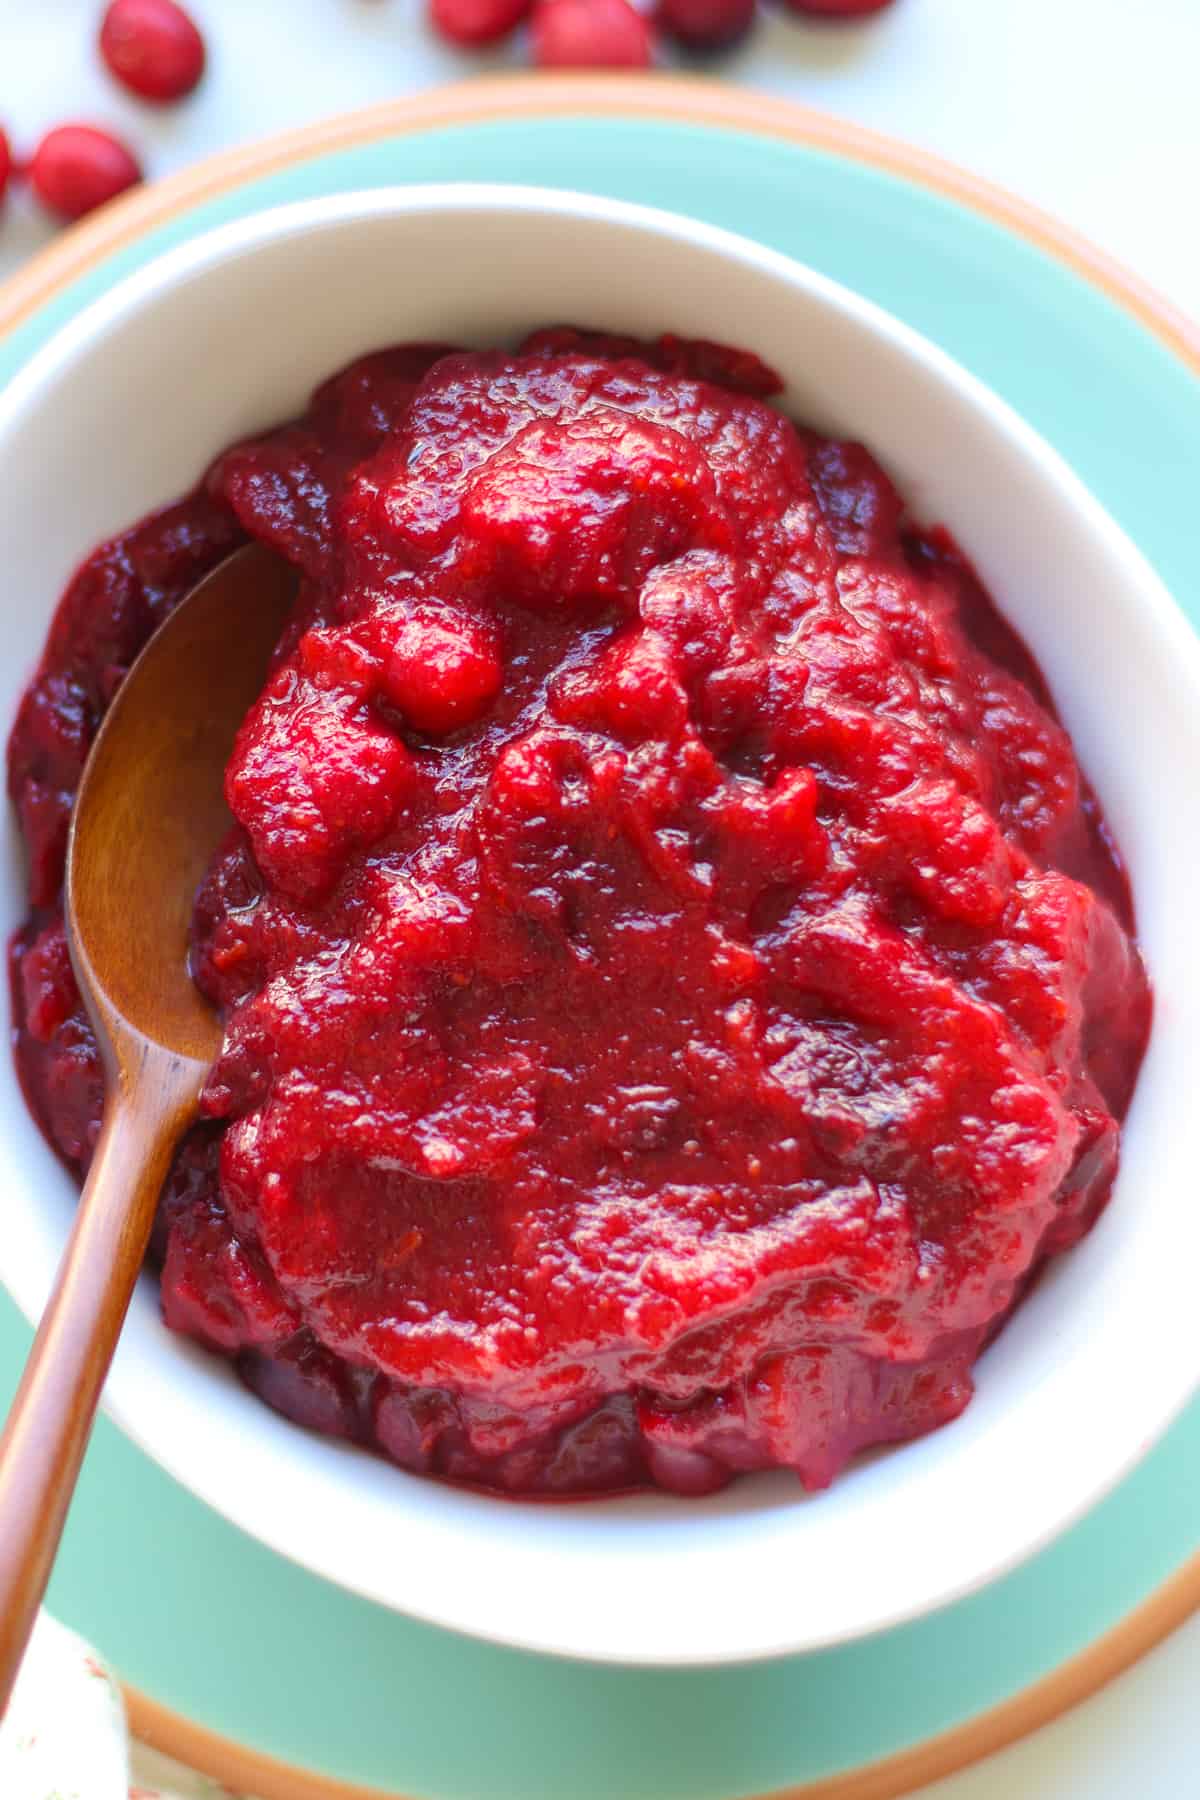 A close up shot of cranberry sauce in a white plate.